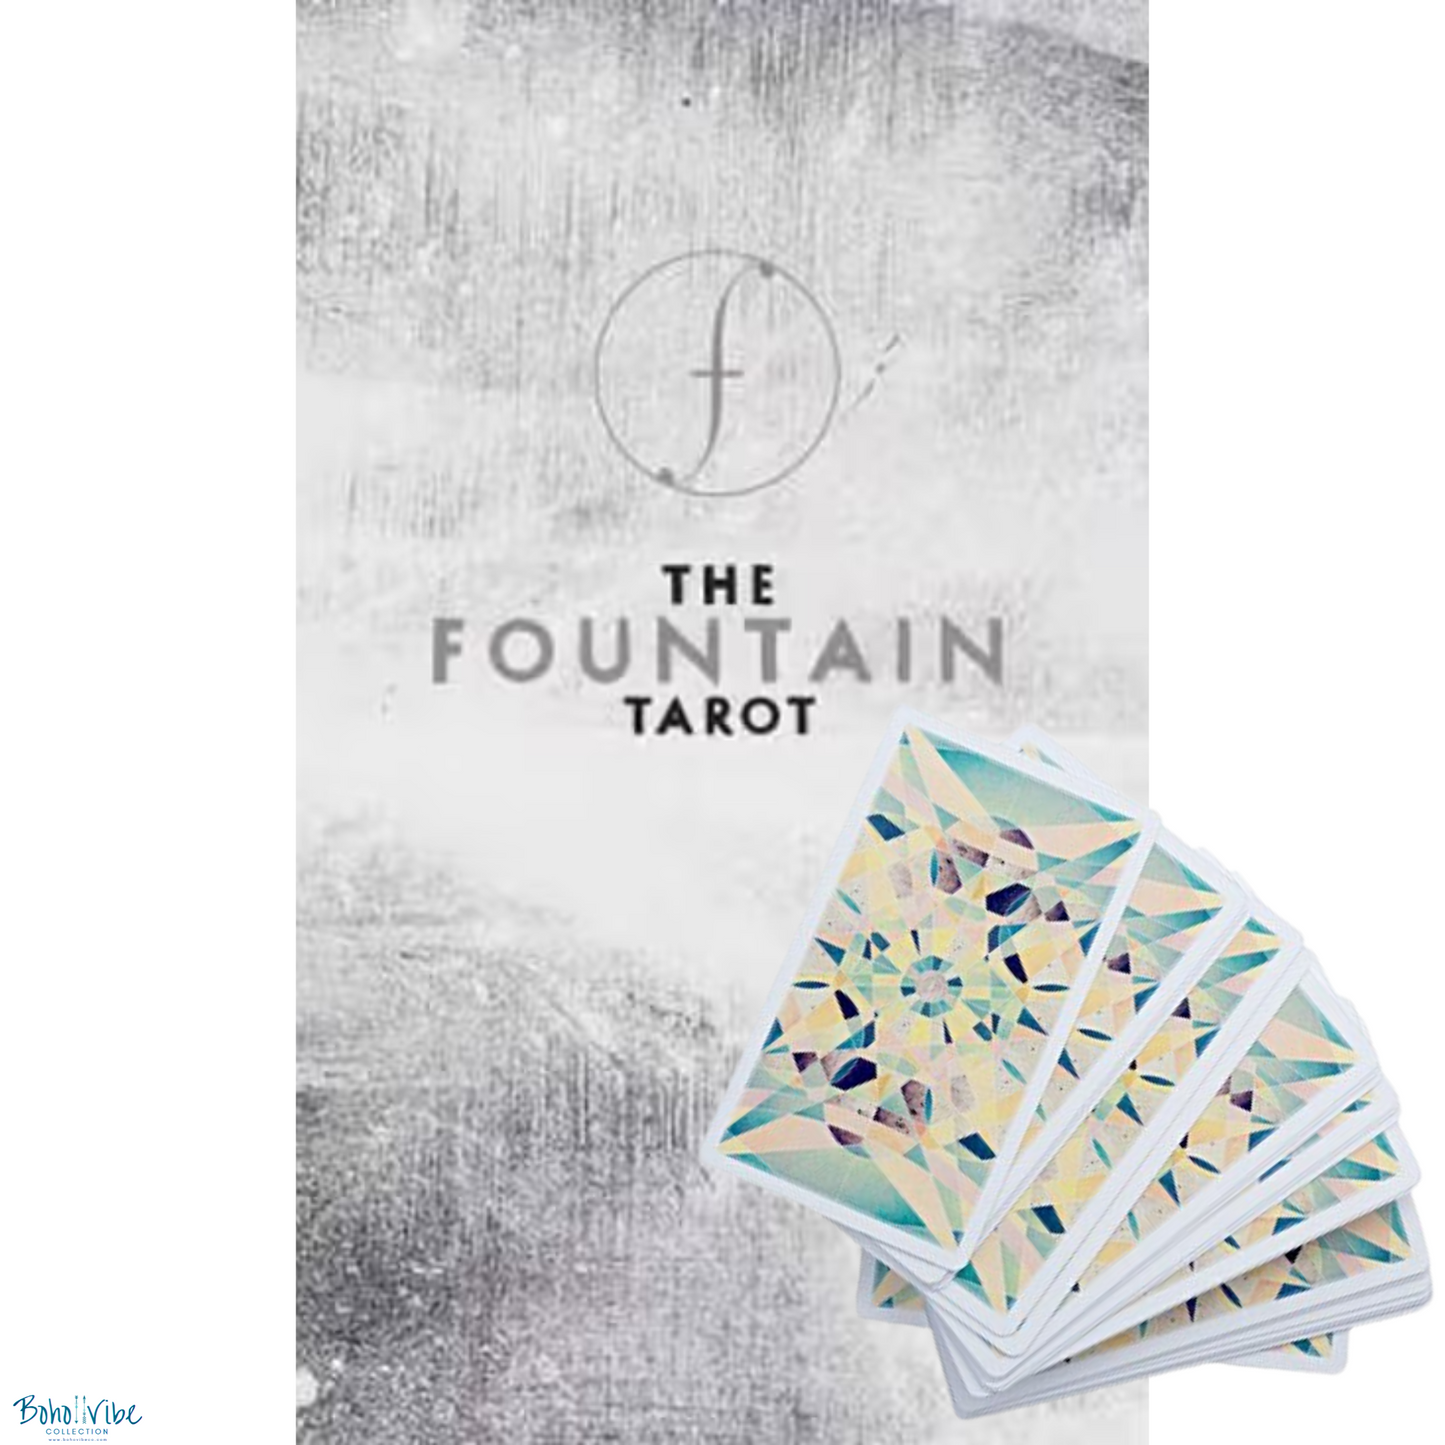 Boho ↡↟ Vibe Collection ↠ Fountain Tarot - Illustrated Gilded Card Deck and Guidebook Boxed Set